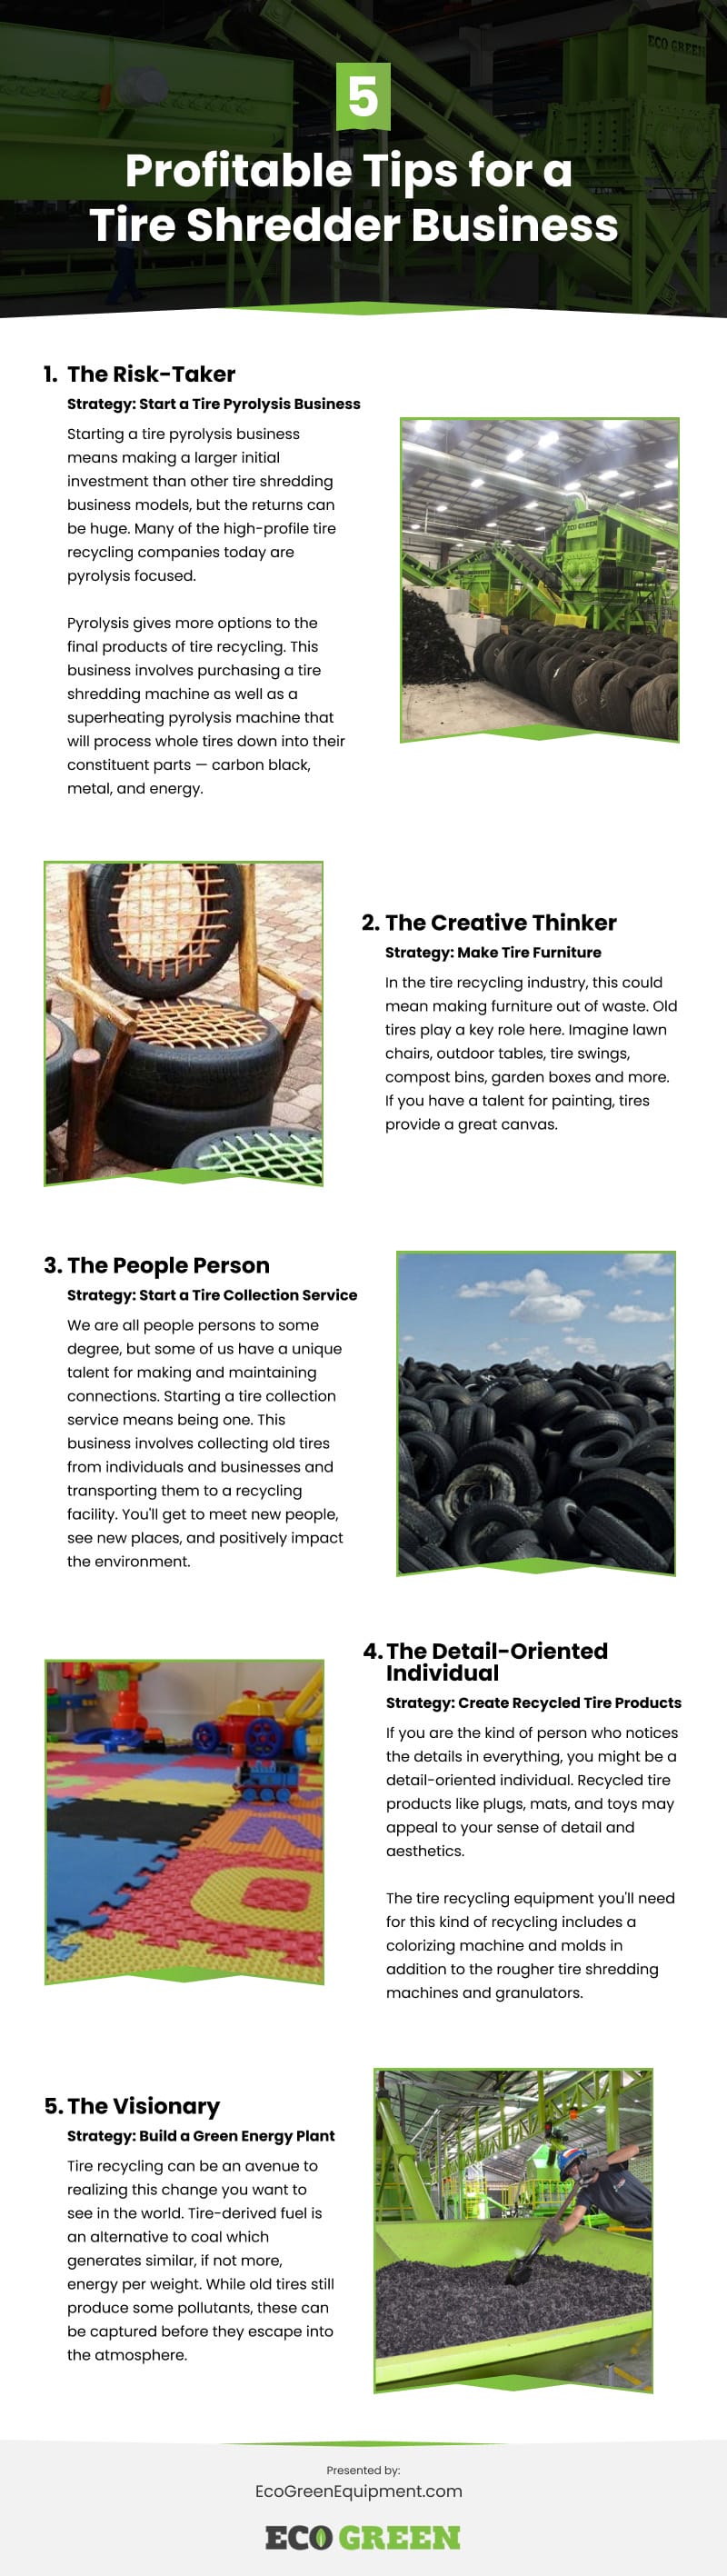 5 Profitable Tips for a Tire Shredder Business Infographic